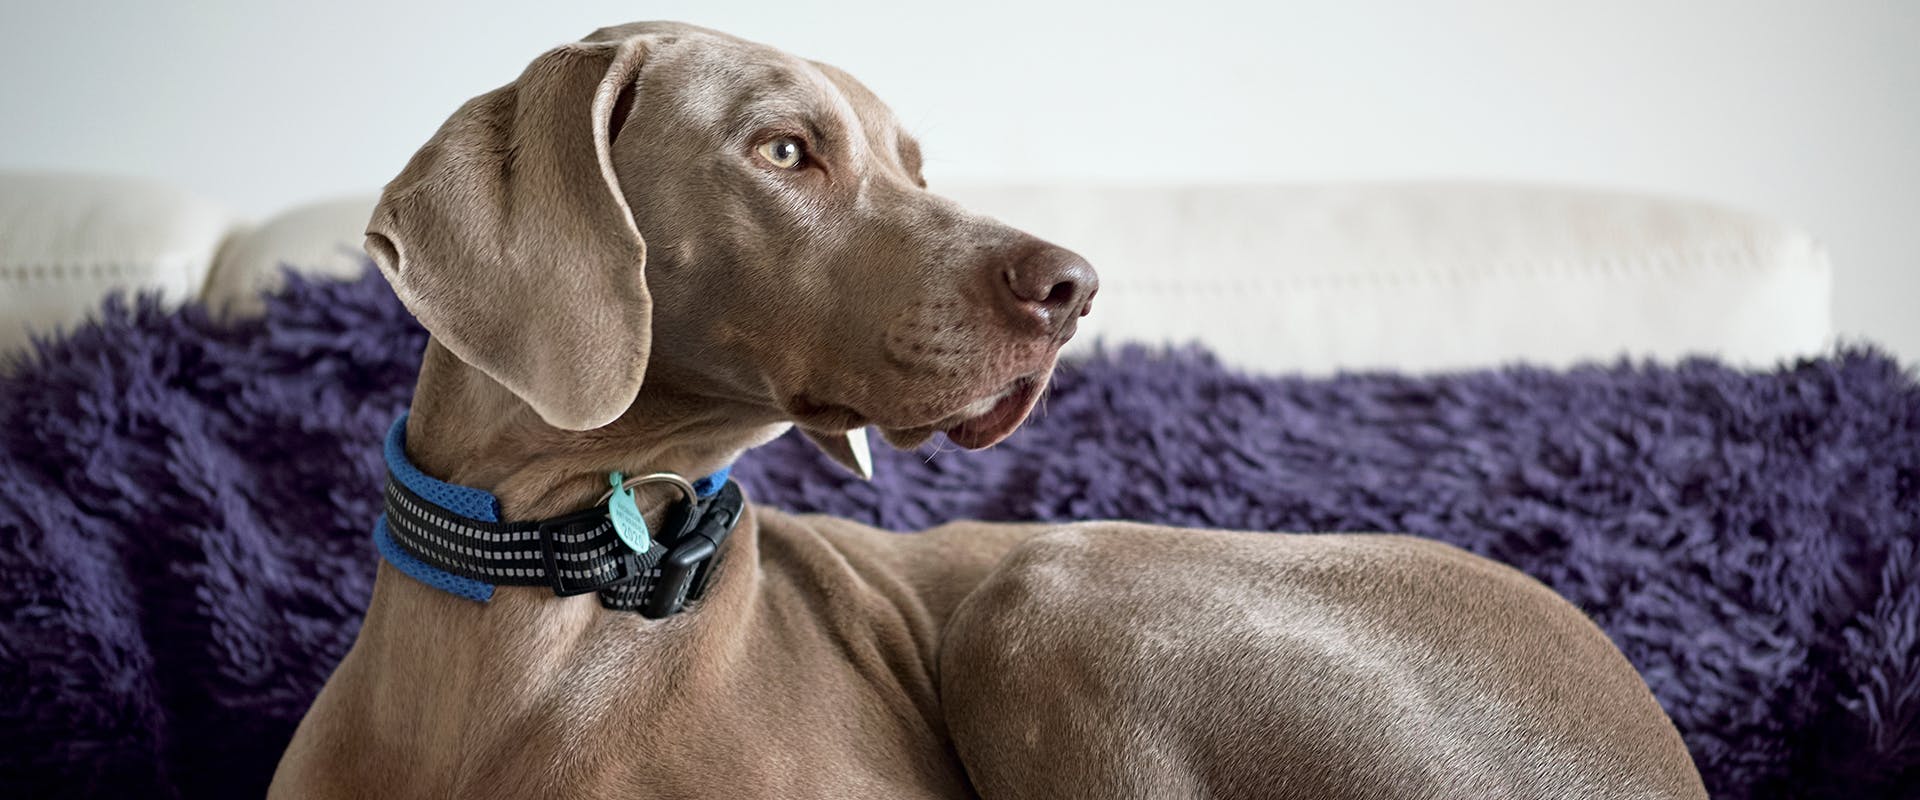 A Weimaraner with floppy ears looking off to the side